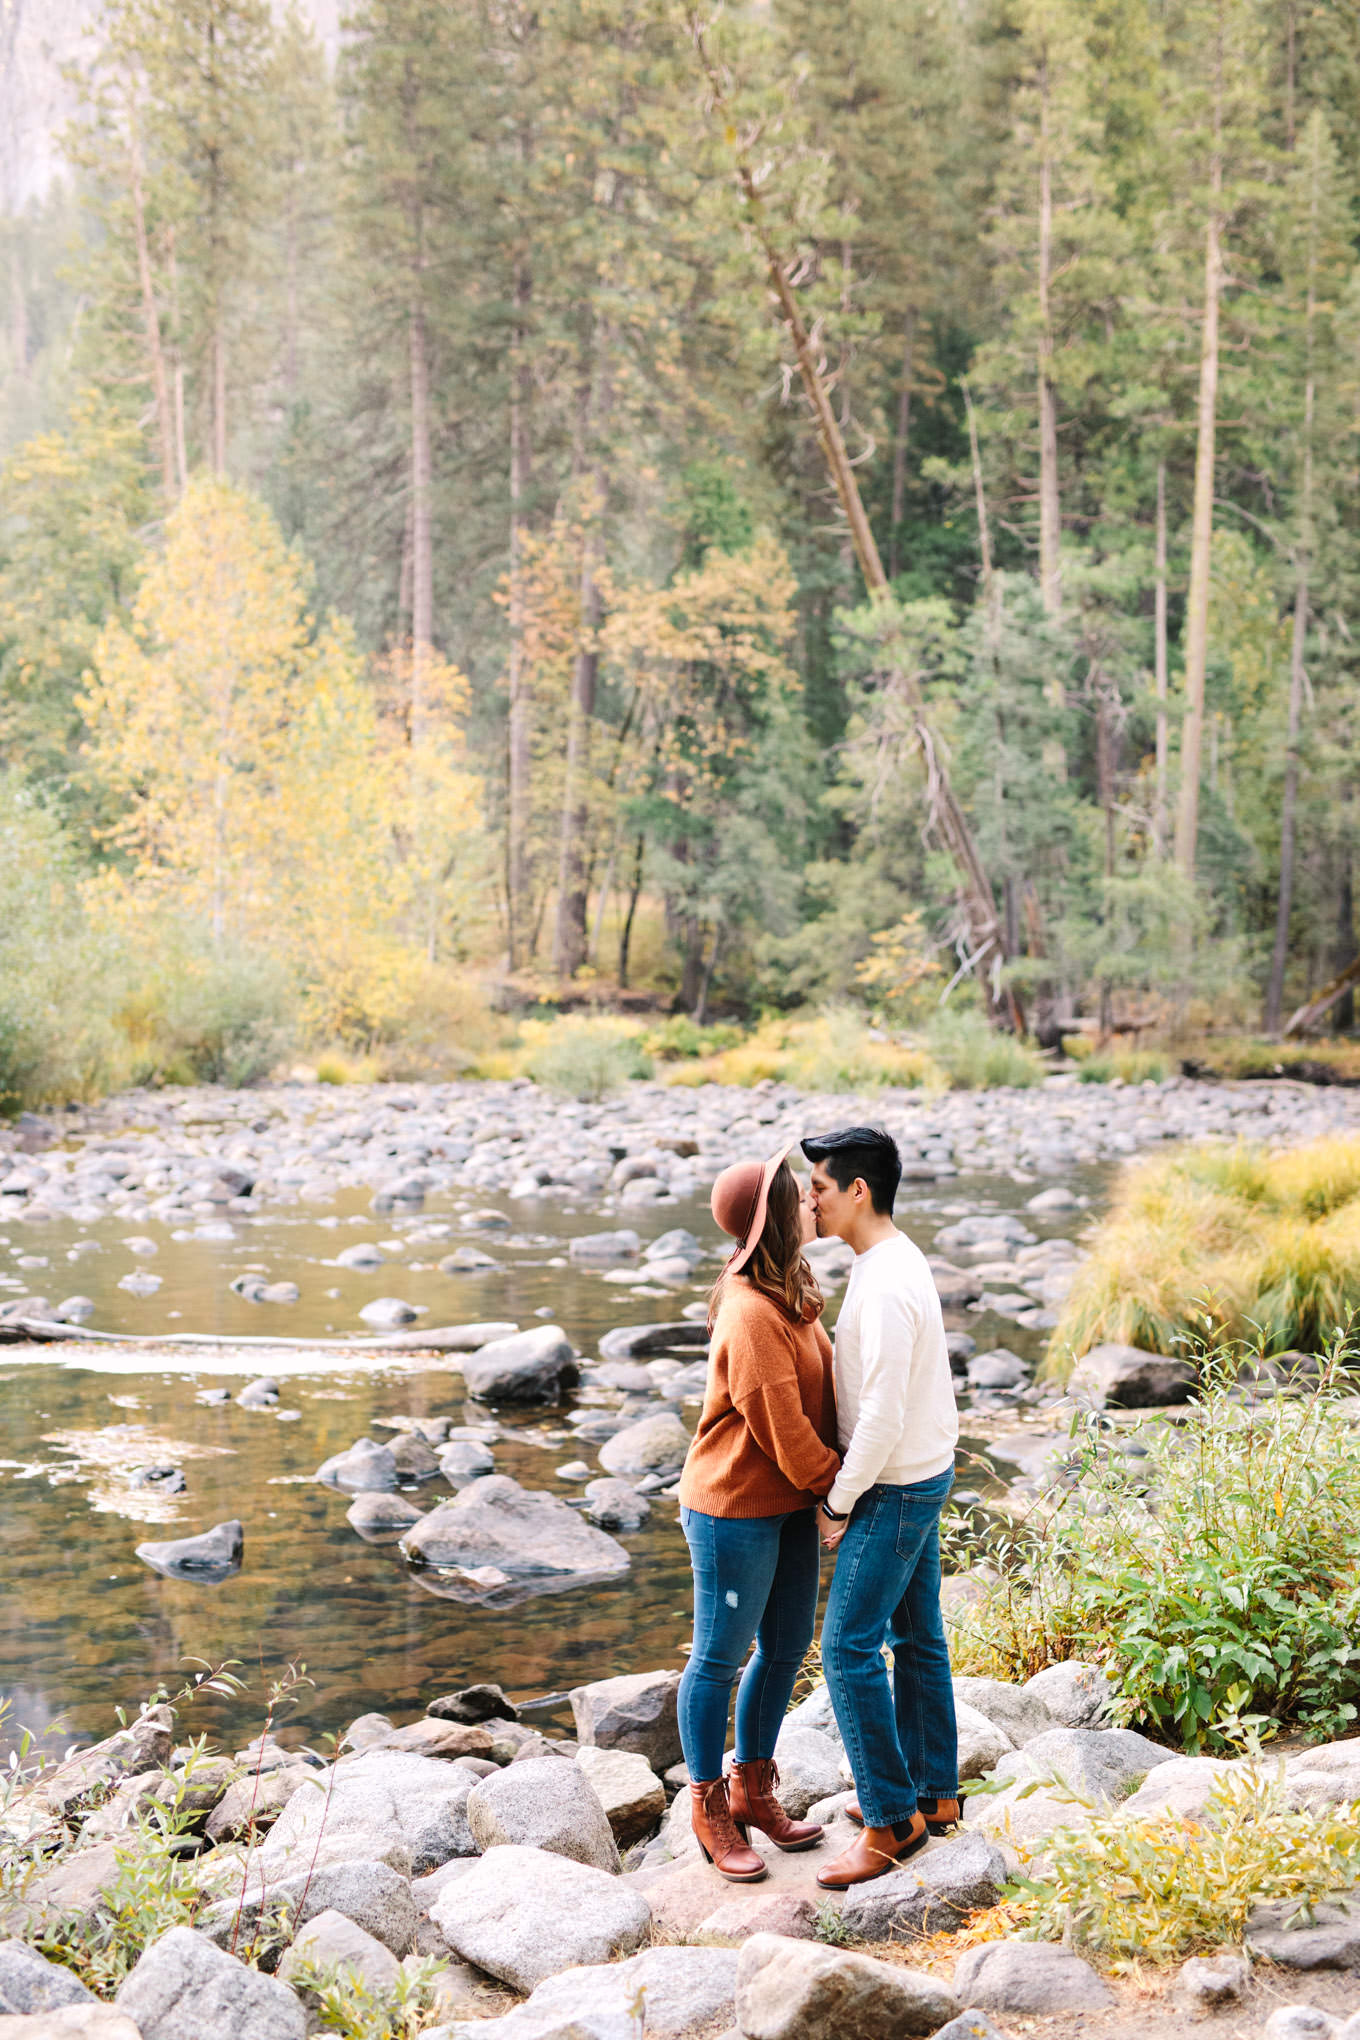 Autumn engagement session in Yosemite National Park Los Angeles Chinatown engagement session | Engagement, elopement, and wedding photography roundup of Mary Costa’s favorite images from 2020 | Colorful and elevated photography for fun-loving couples in Southern California | #2020wedding #elopement #weddingphoto #weddingphotography #microwedding   Source: Mary Costa Photography | Los Angeles